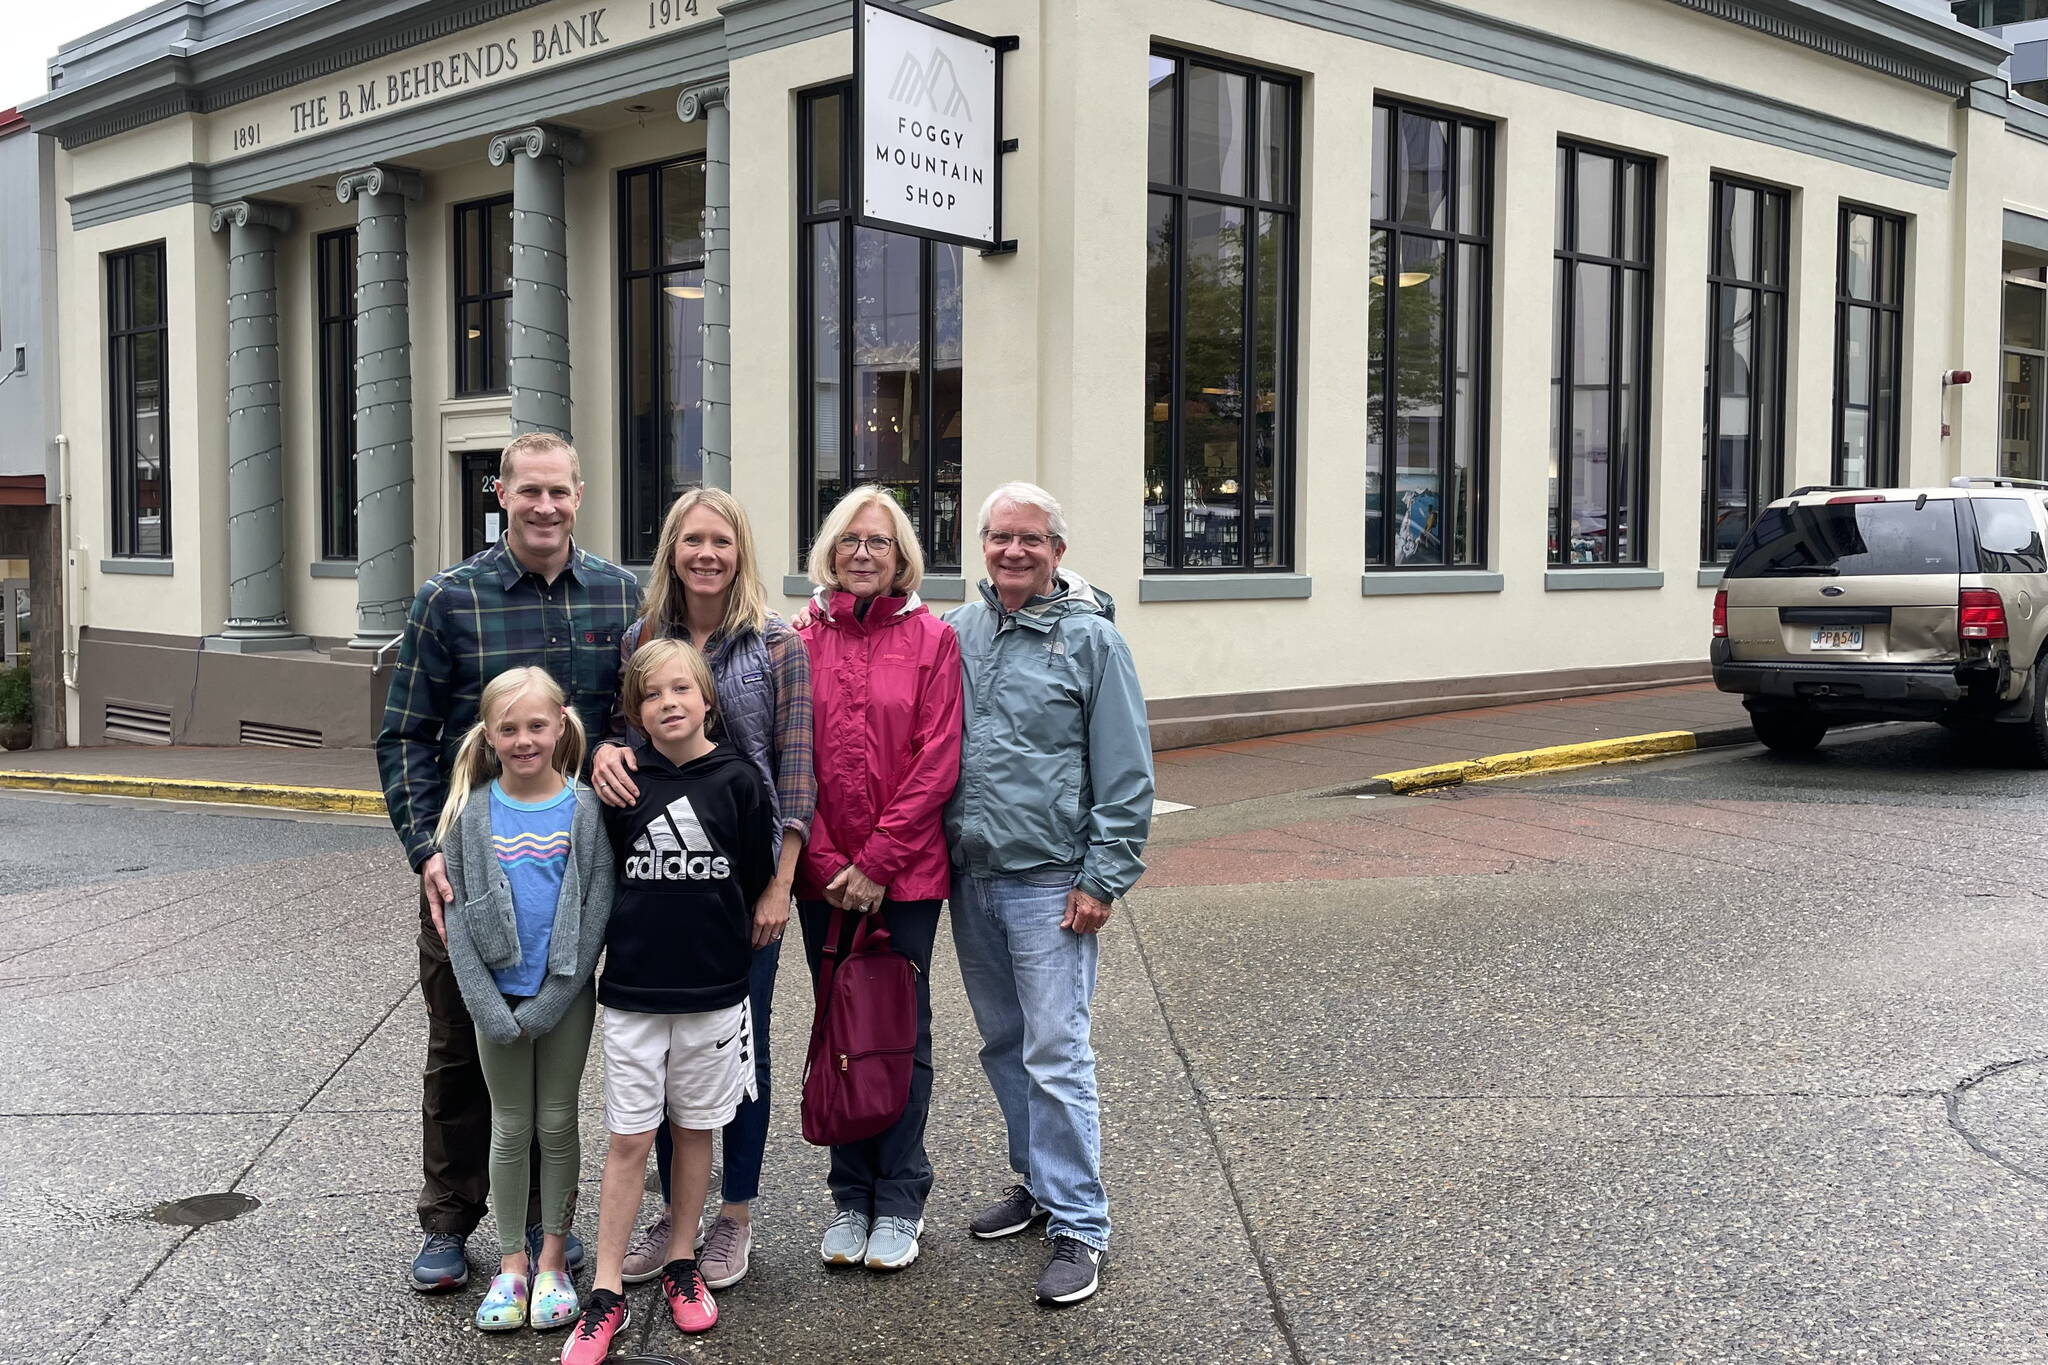 Three generations of the Behrends-Gruening family stand outside the bank founded by B.M. Behrends. Standing from left: Jack Vines, Caroline Gruening Vines, Anne Gruening (great-granddaughter of B.M. Behrends), and Win Gruening (grandson of Governor and Senator Ernest Gruening). Young Norah and Jack Vines stand in front. (Photo by Laurie Craig)